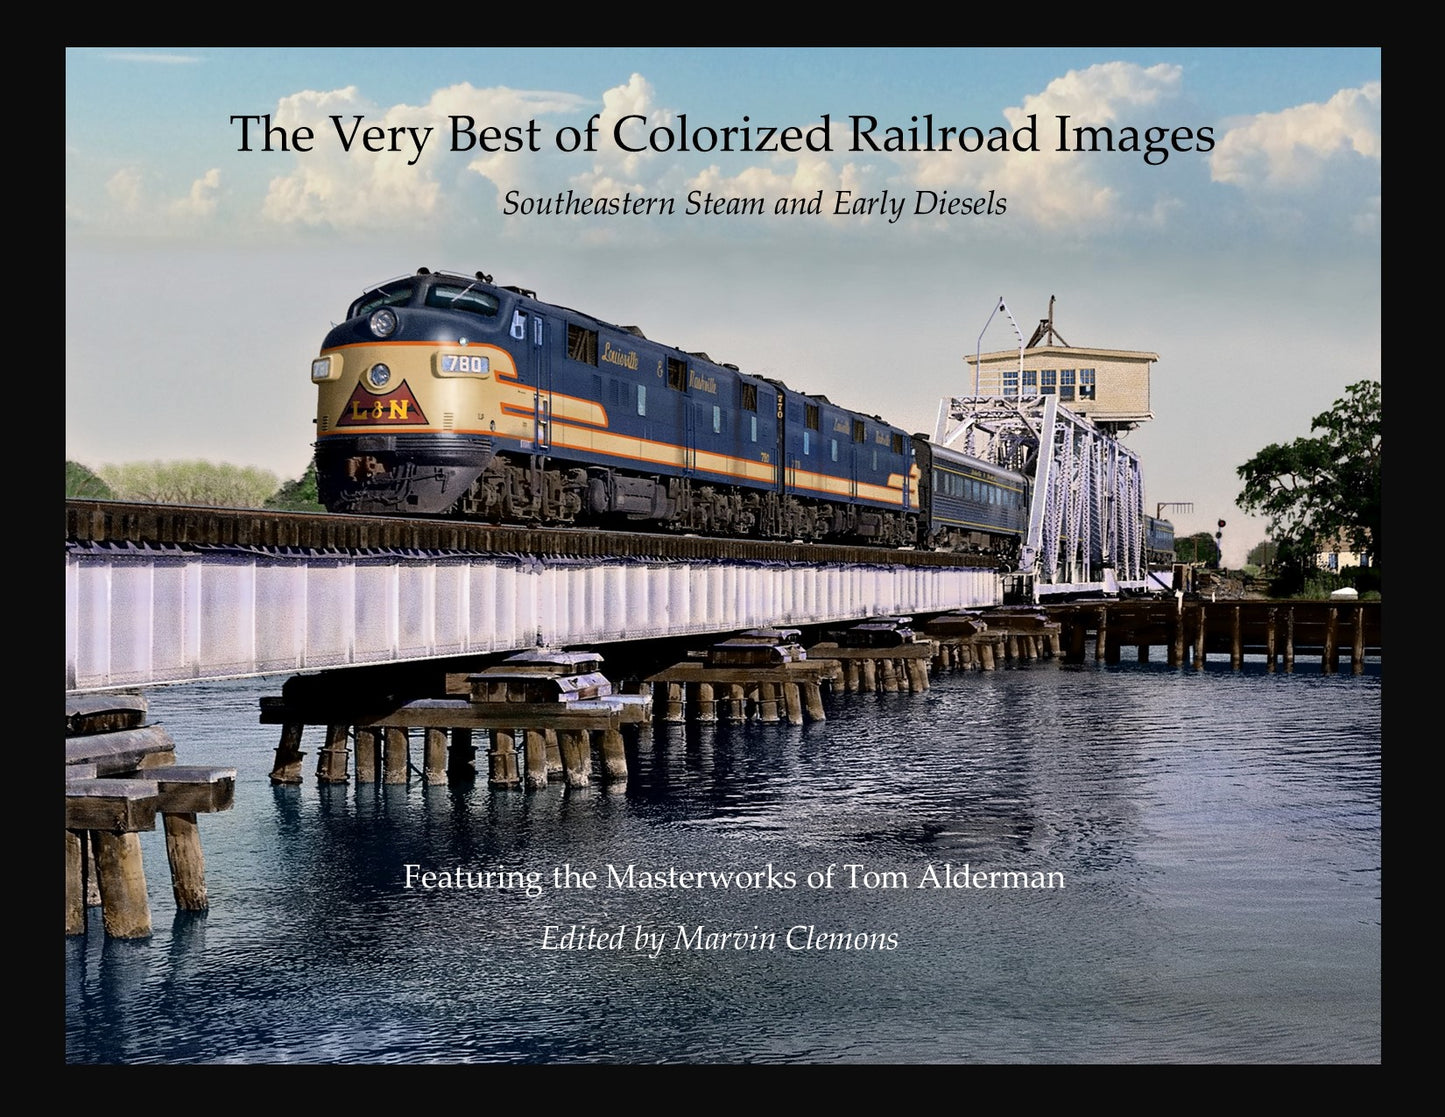 The Very Best of Colorized Railroad Images: Southeastern Steam to Early Diesels